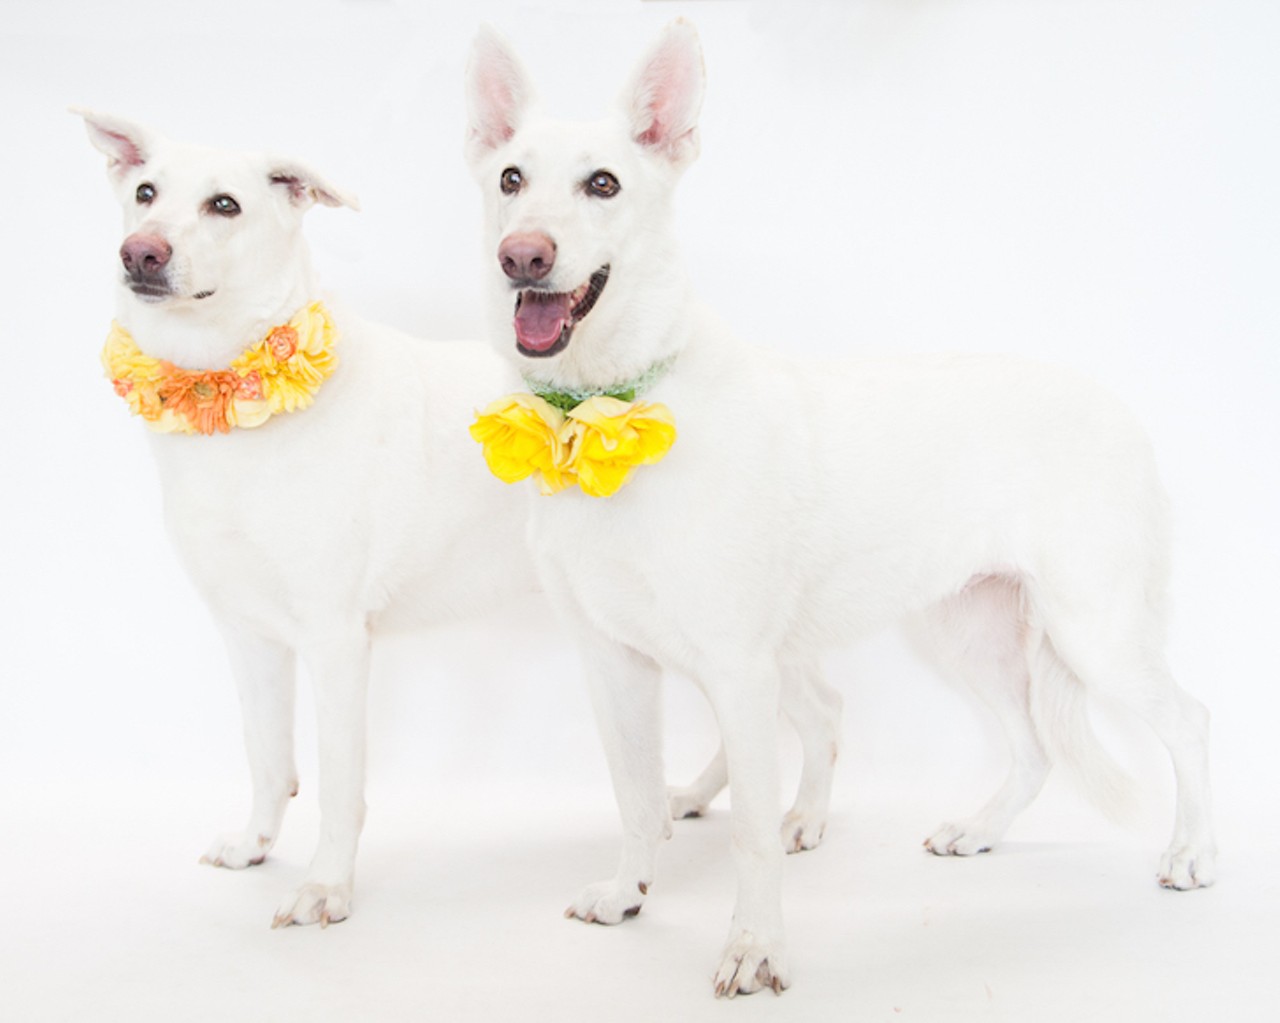 24 adoptable dogs looking for a serious relationship